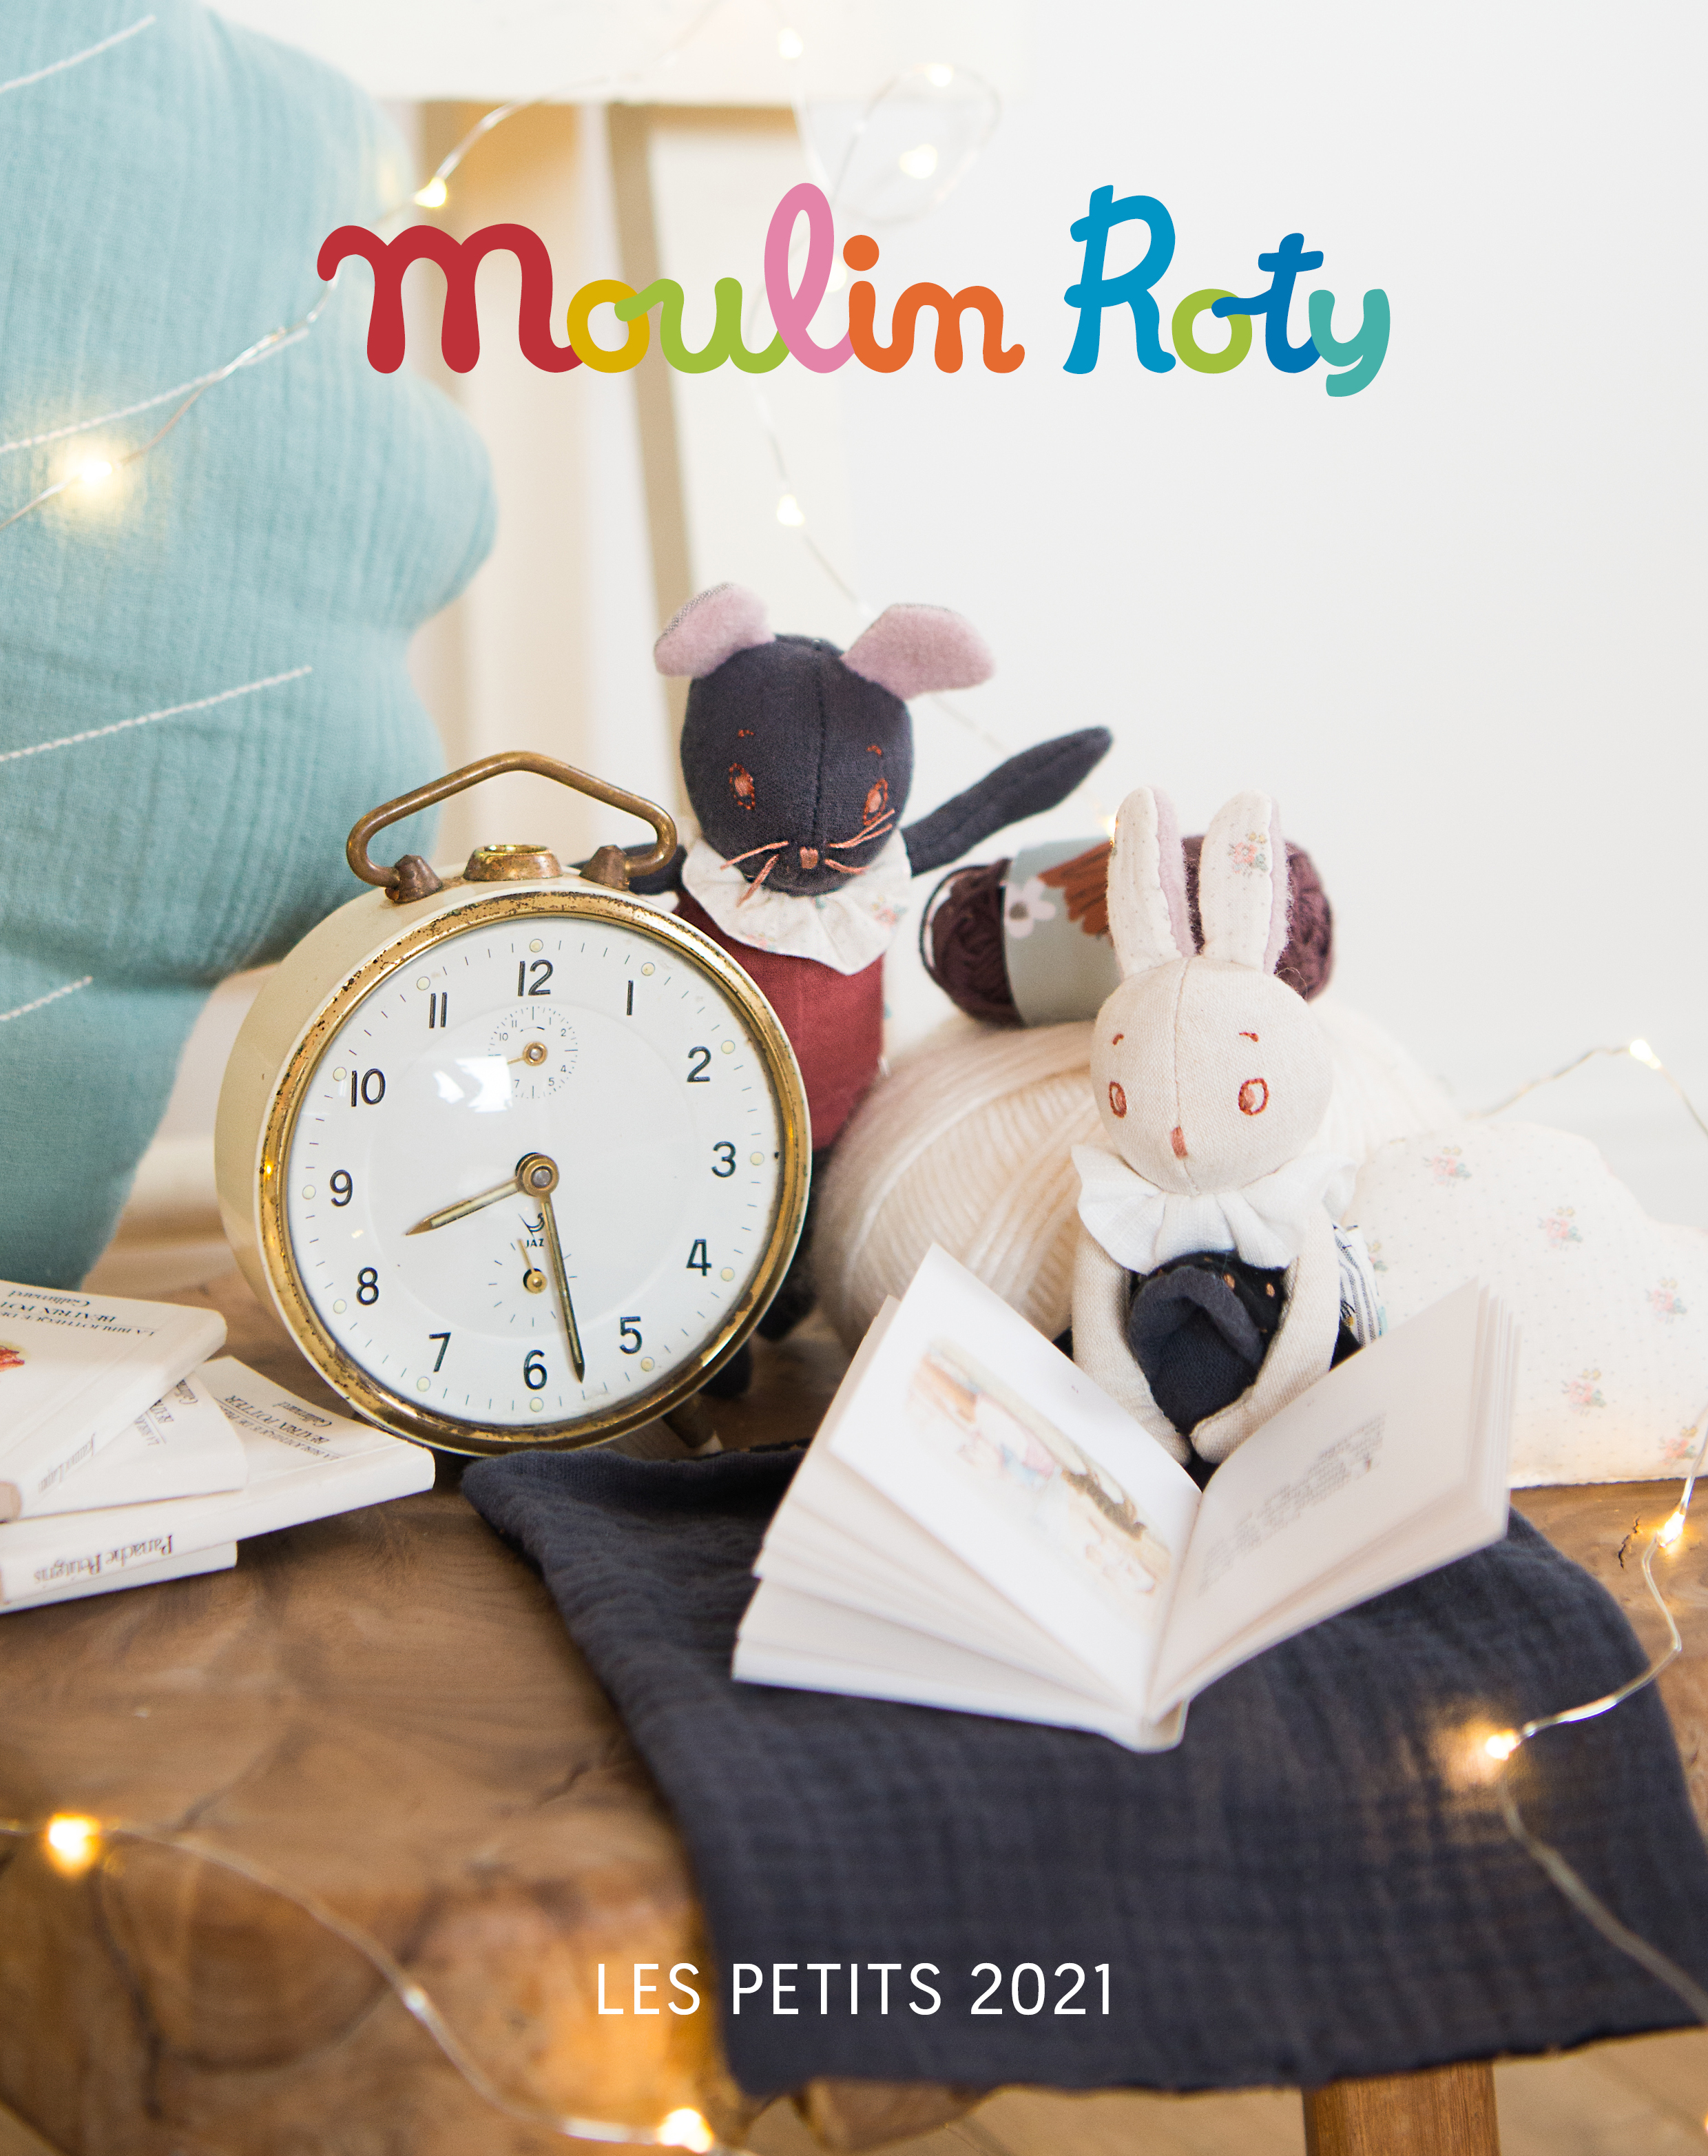 wholesale plush toys and baby toys from quality French toymakers Moulin Roty